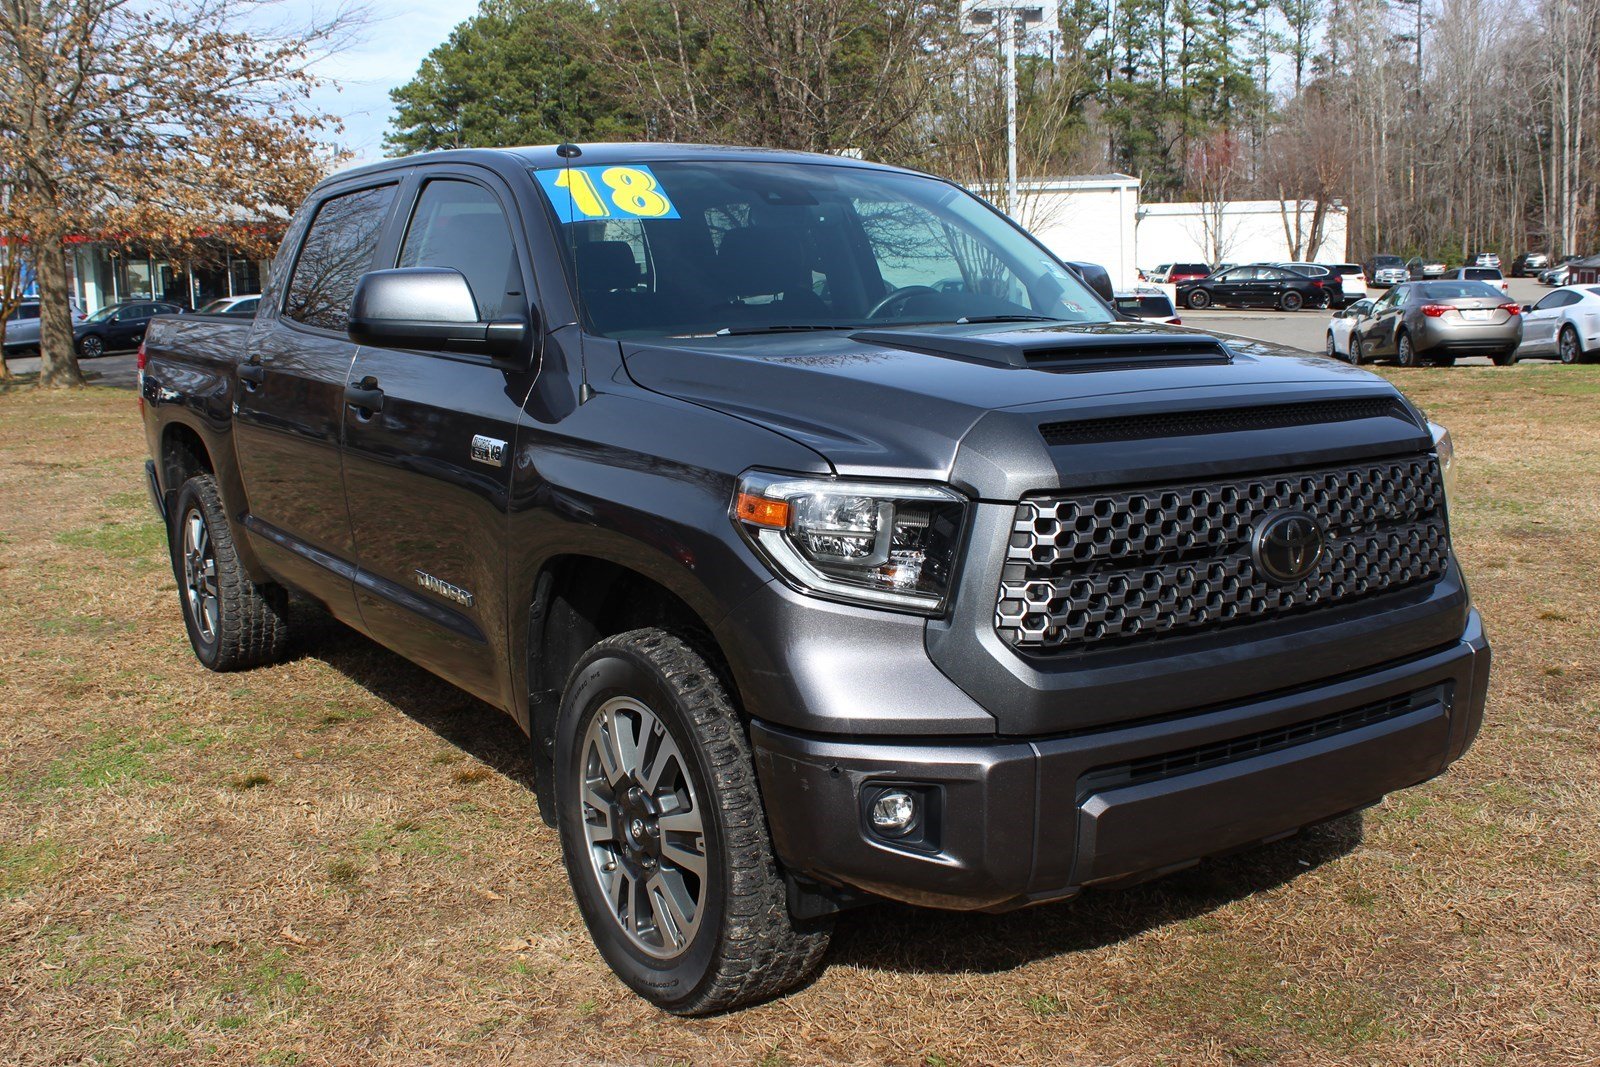 Pre-Owned 2018 Toyota Tundra 4WD SR5 Crew Cab Pickup in Gloucester #